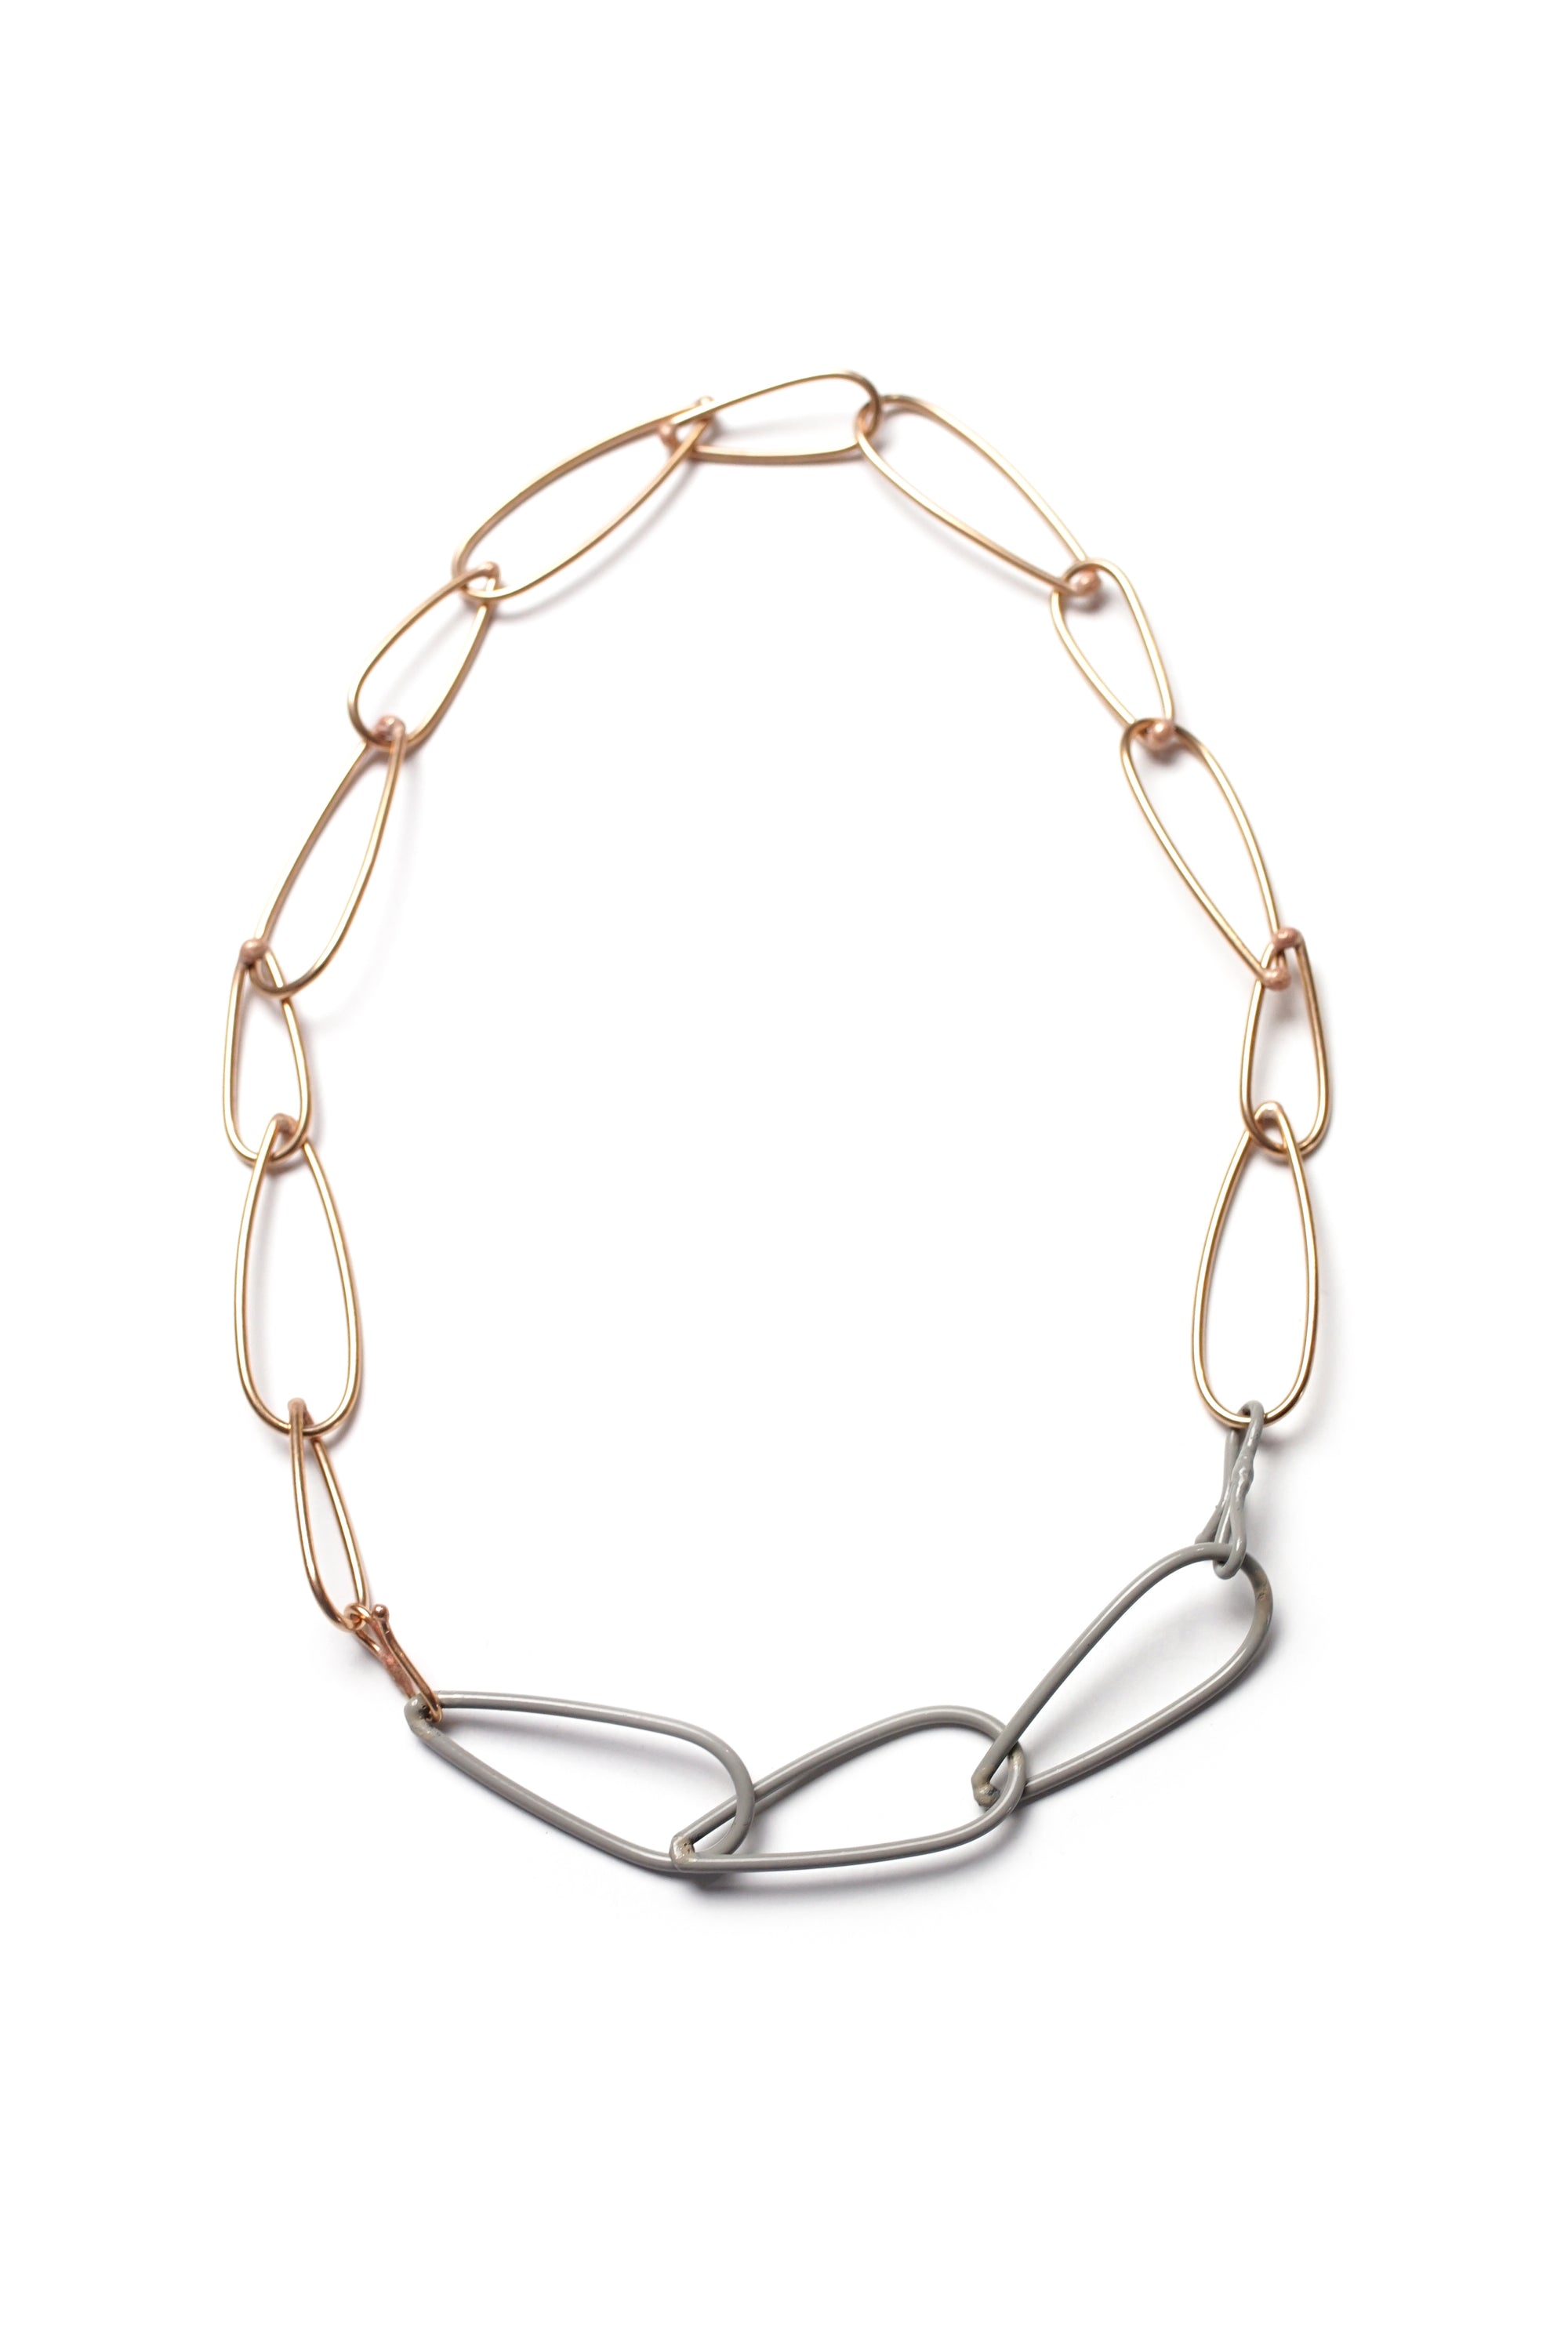 Modular Necklace in Bronze and Stone Grey